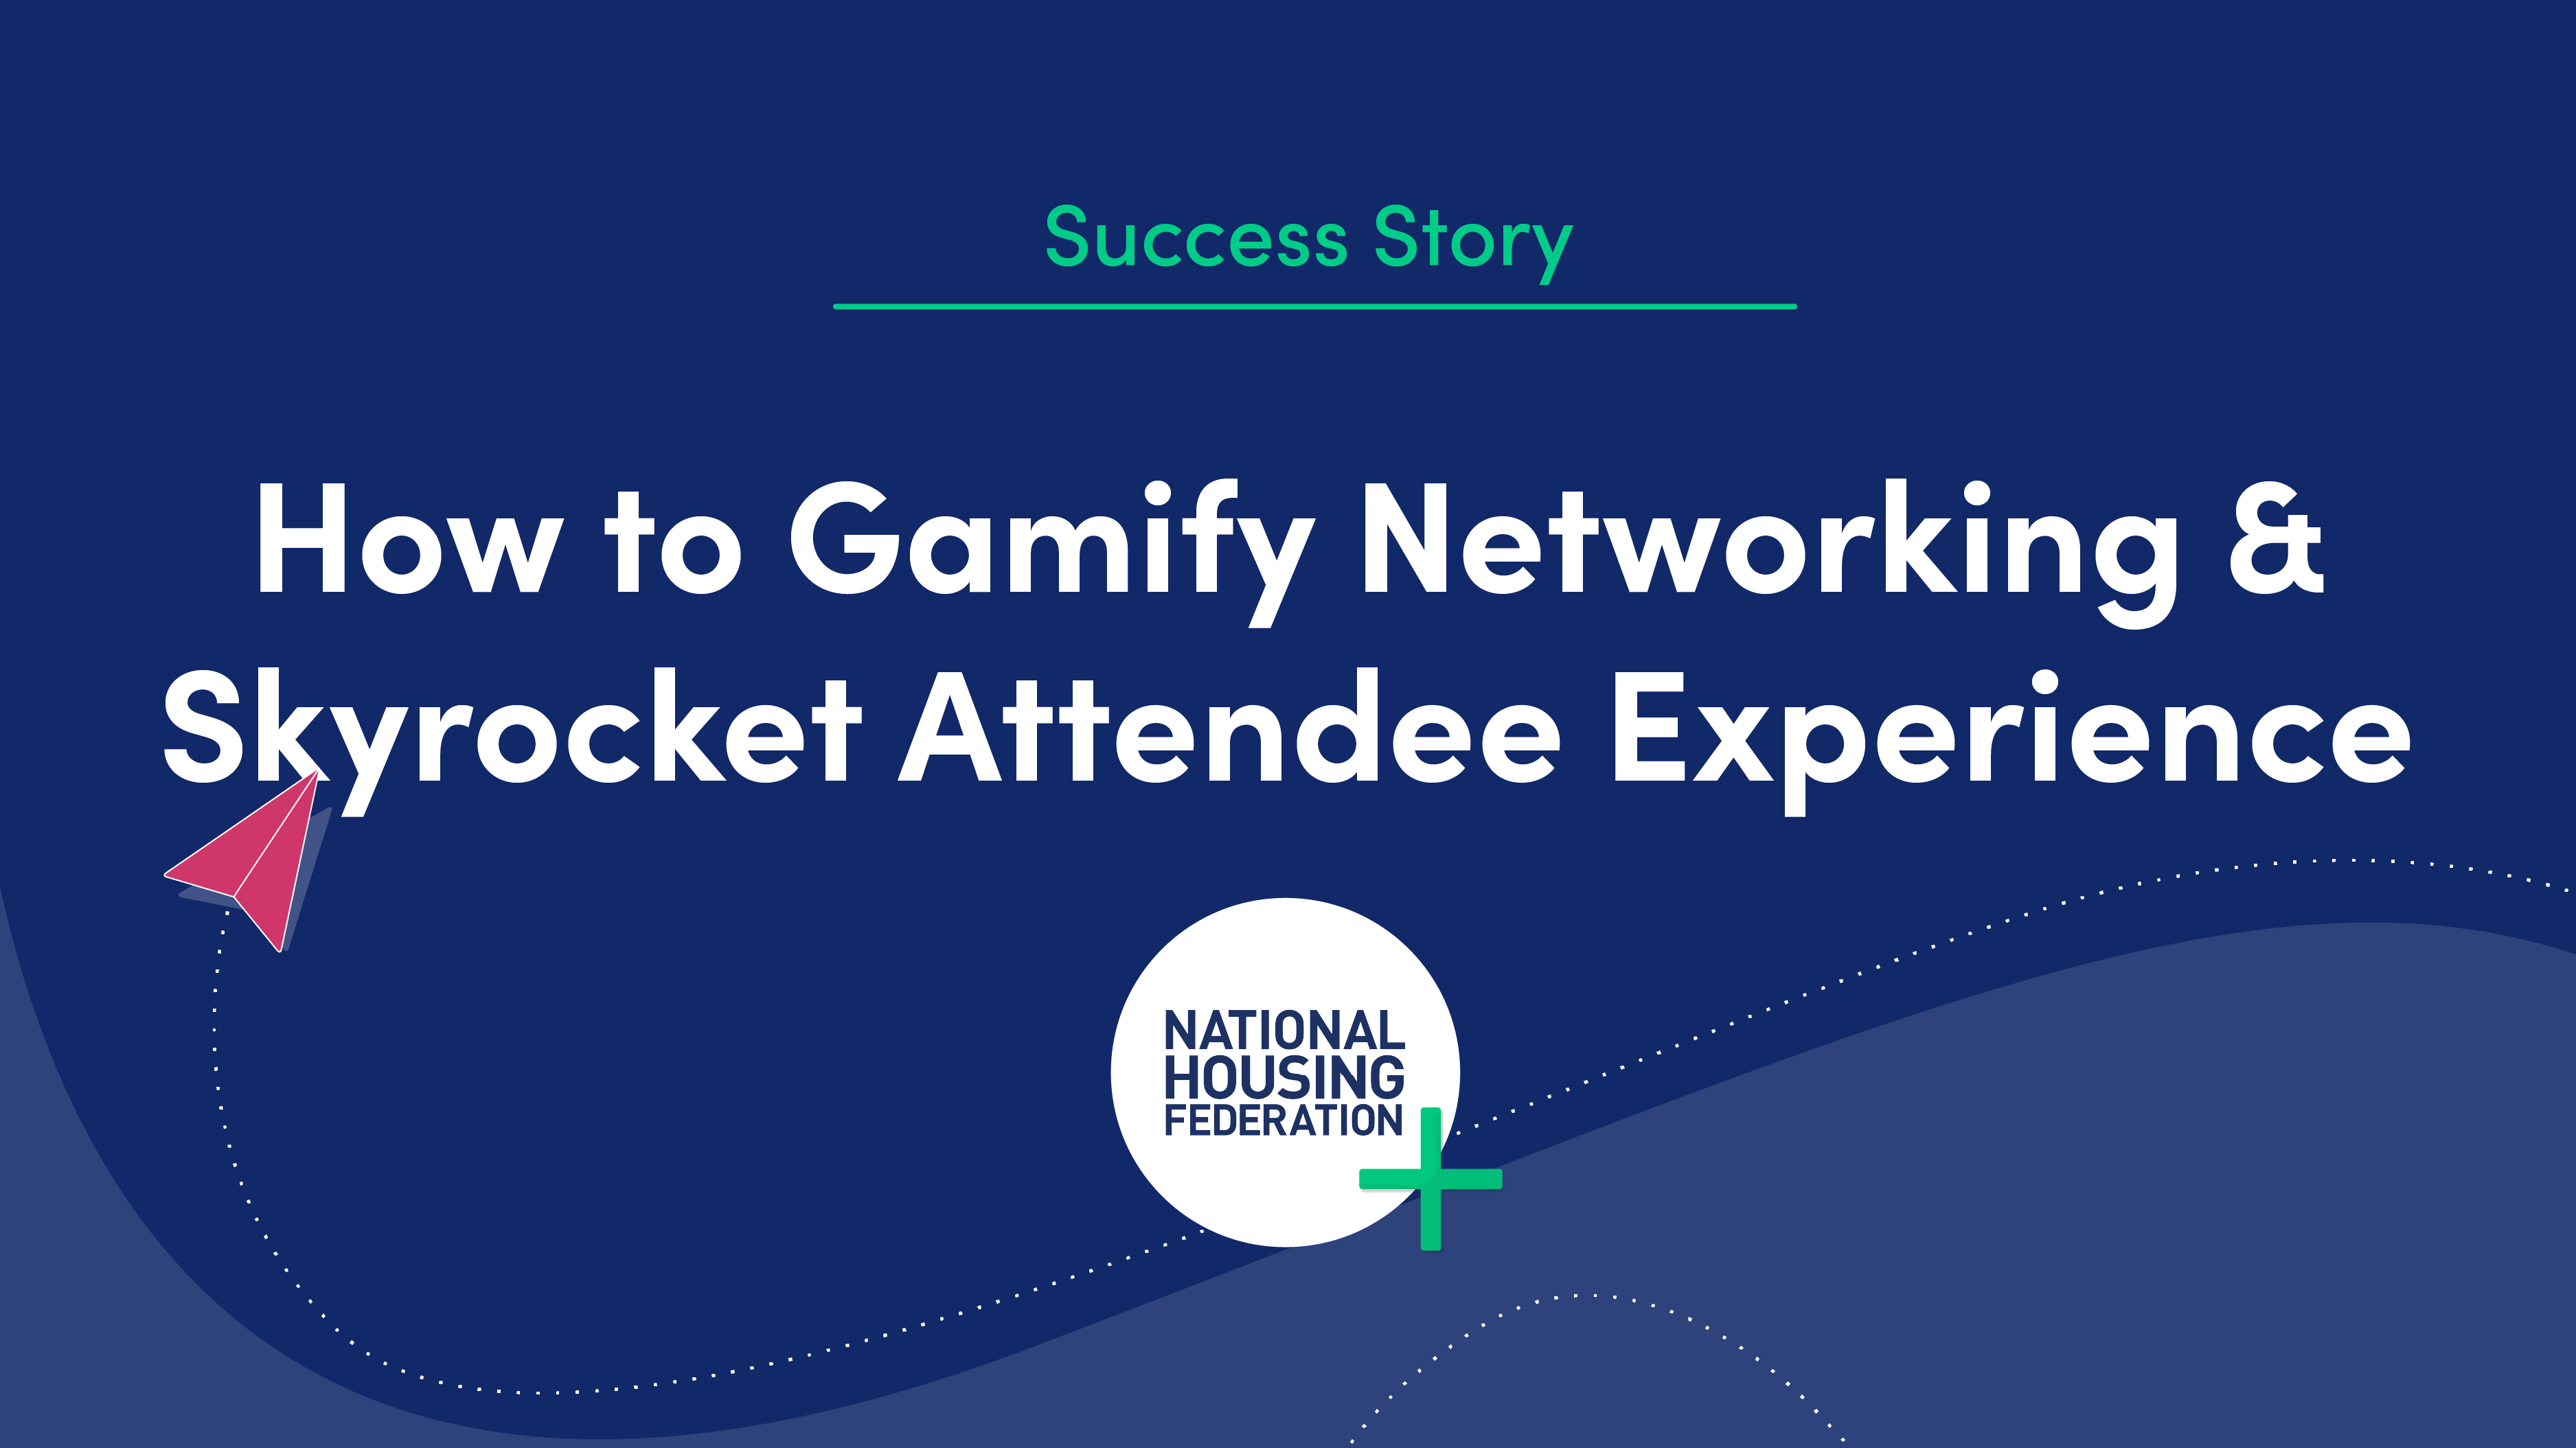 How to Gamify Networking & Skyrocket Attendee Experience